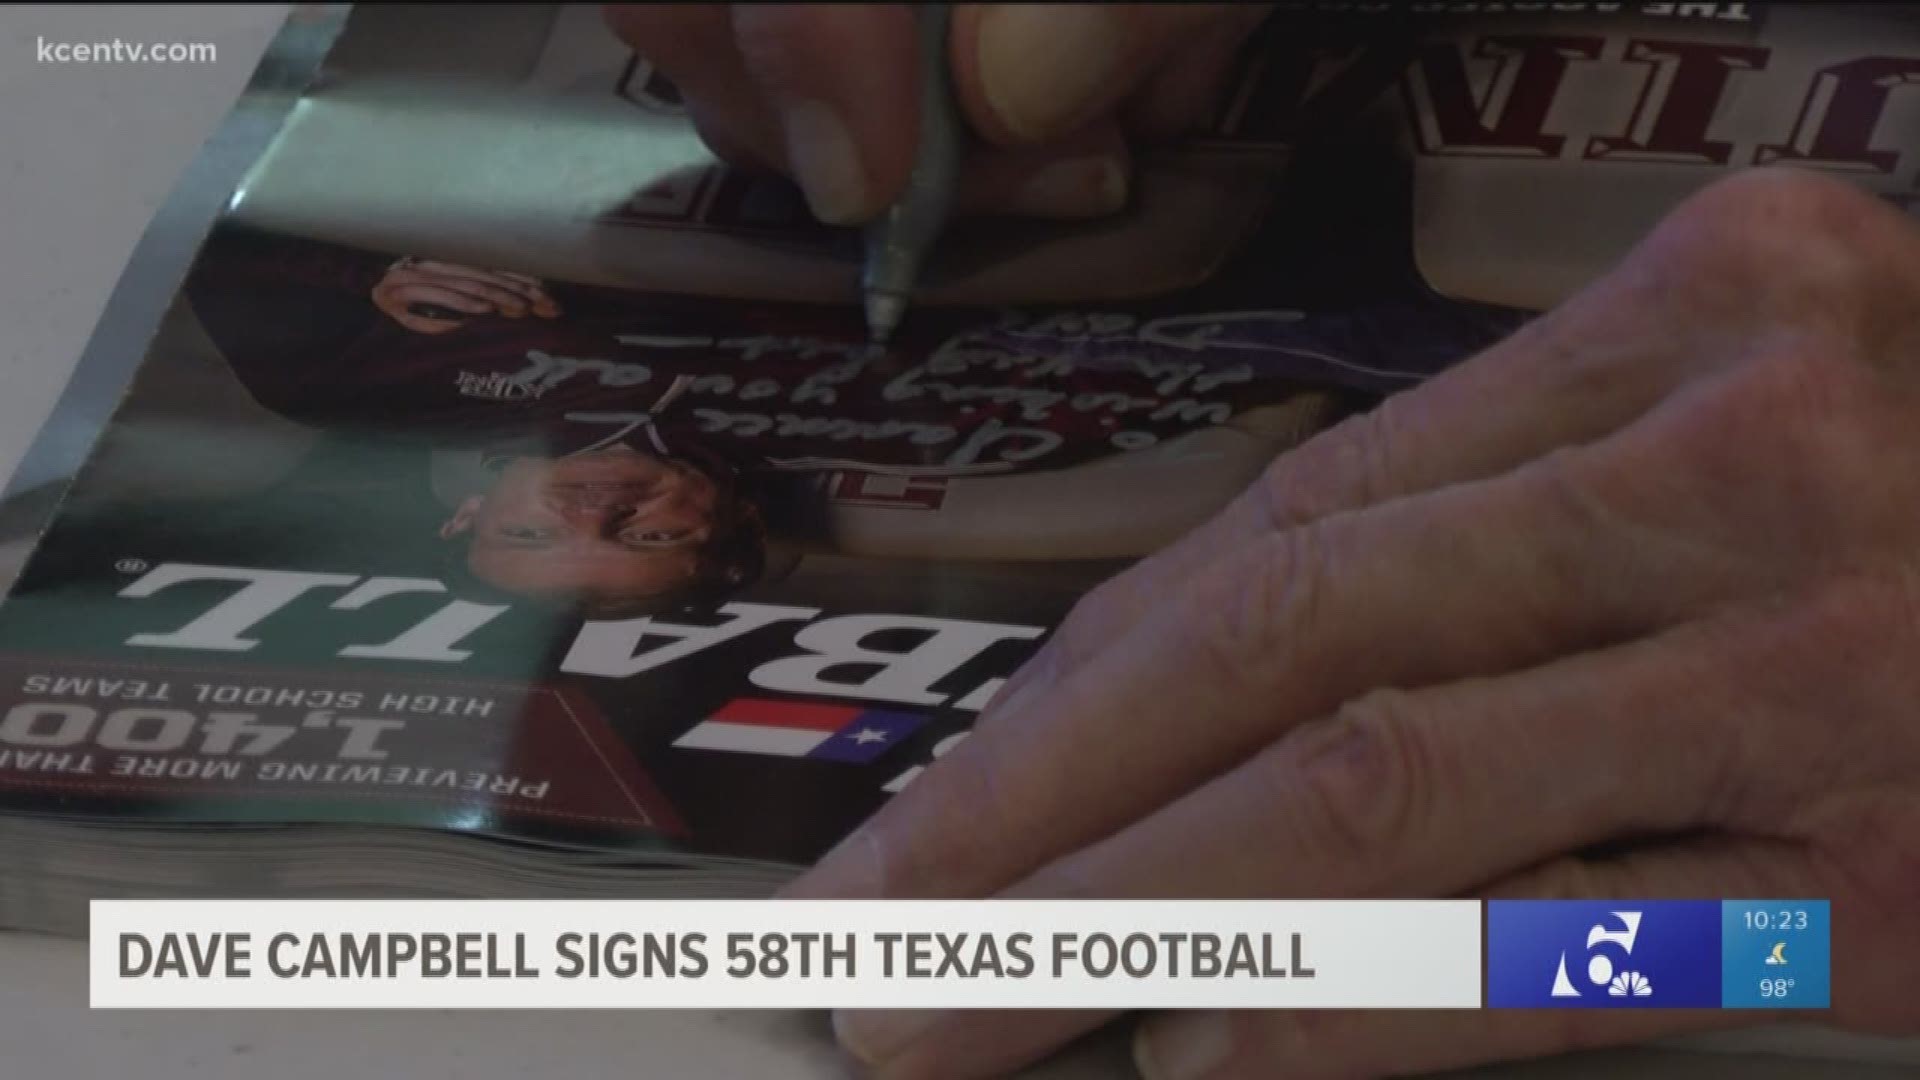 At 93, Campbell reflected on the 58 years of the state's biggest football magazine.